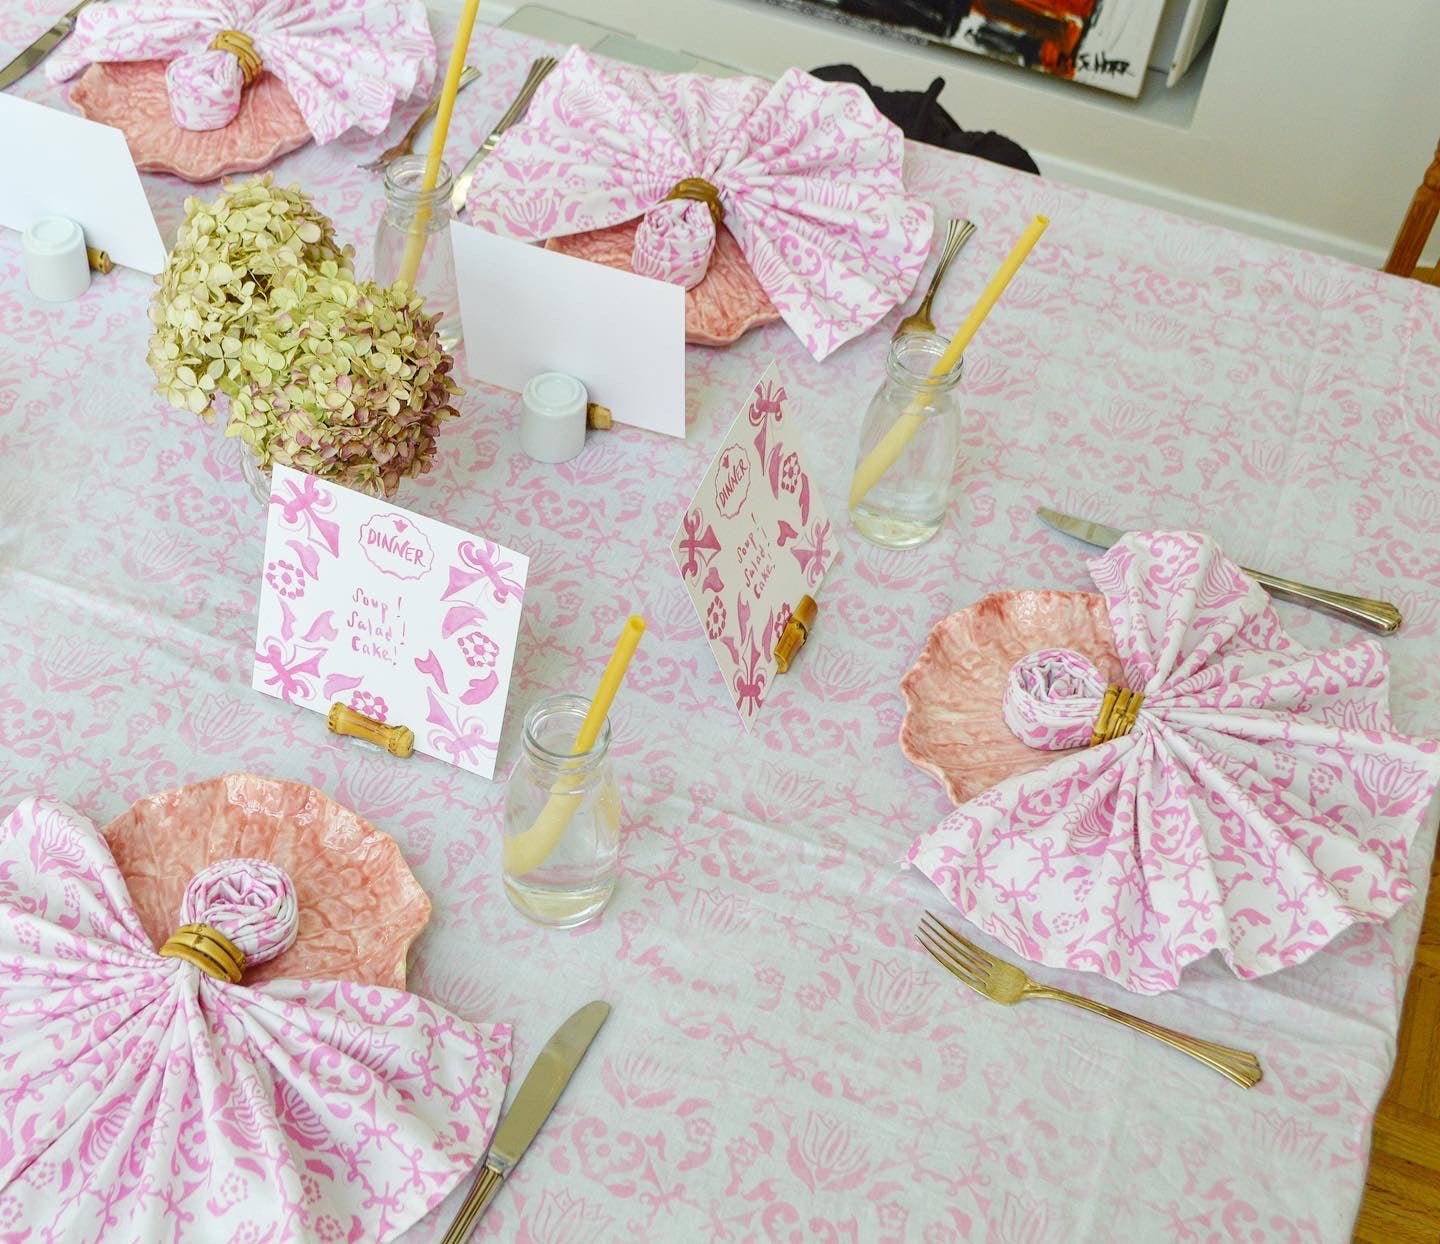 Chefanie Pink Tablecape for Bridal Shower Baby Shower or Galentines